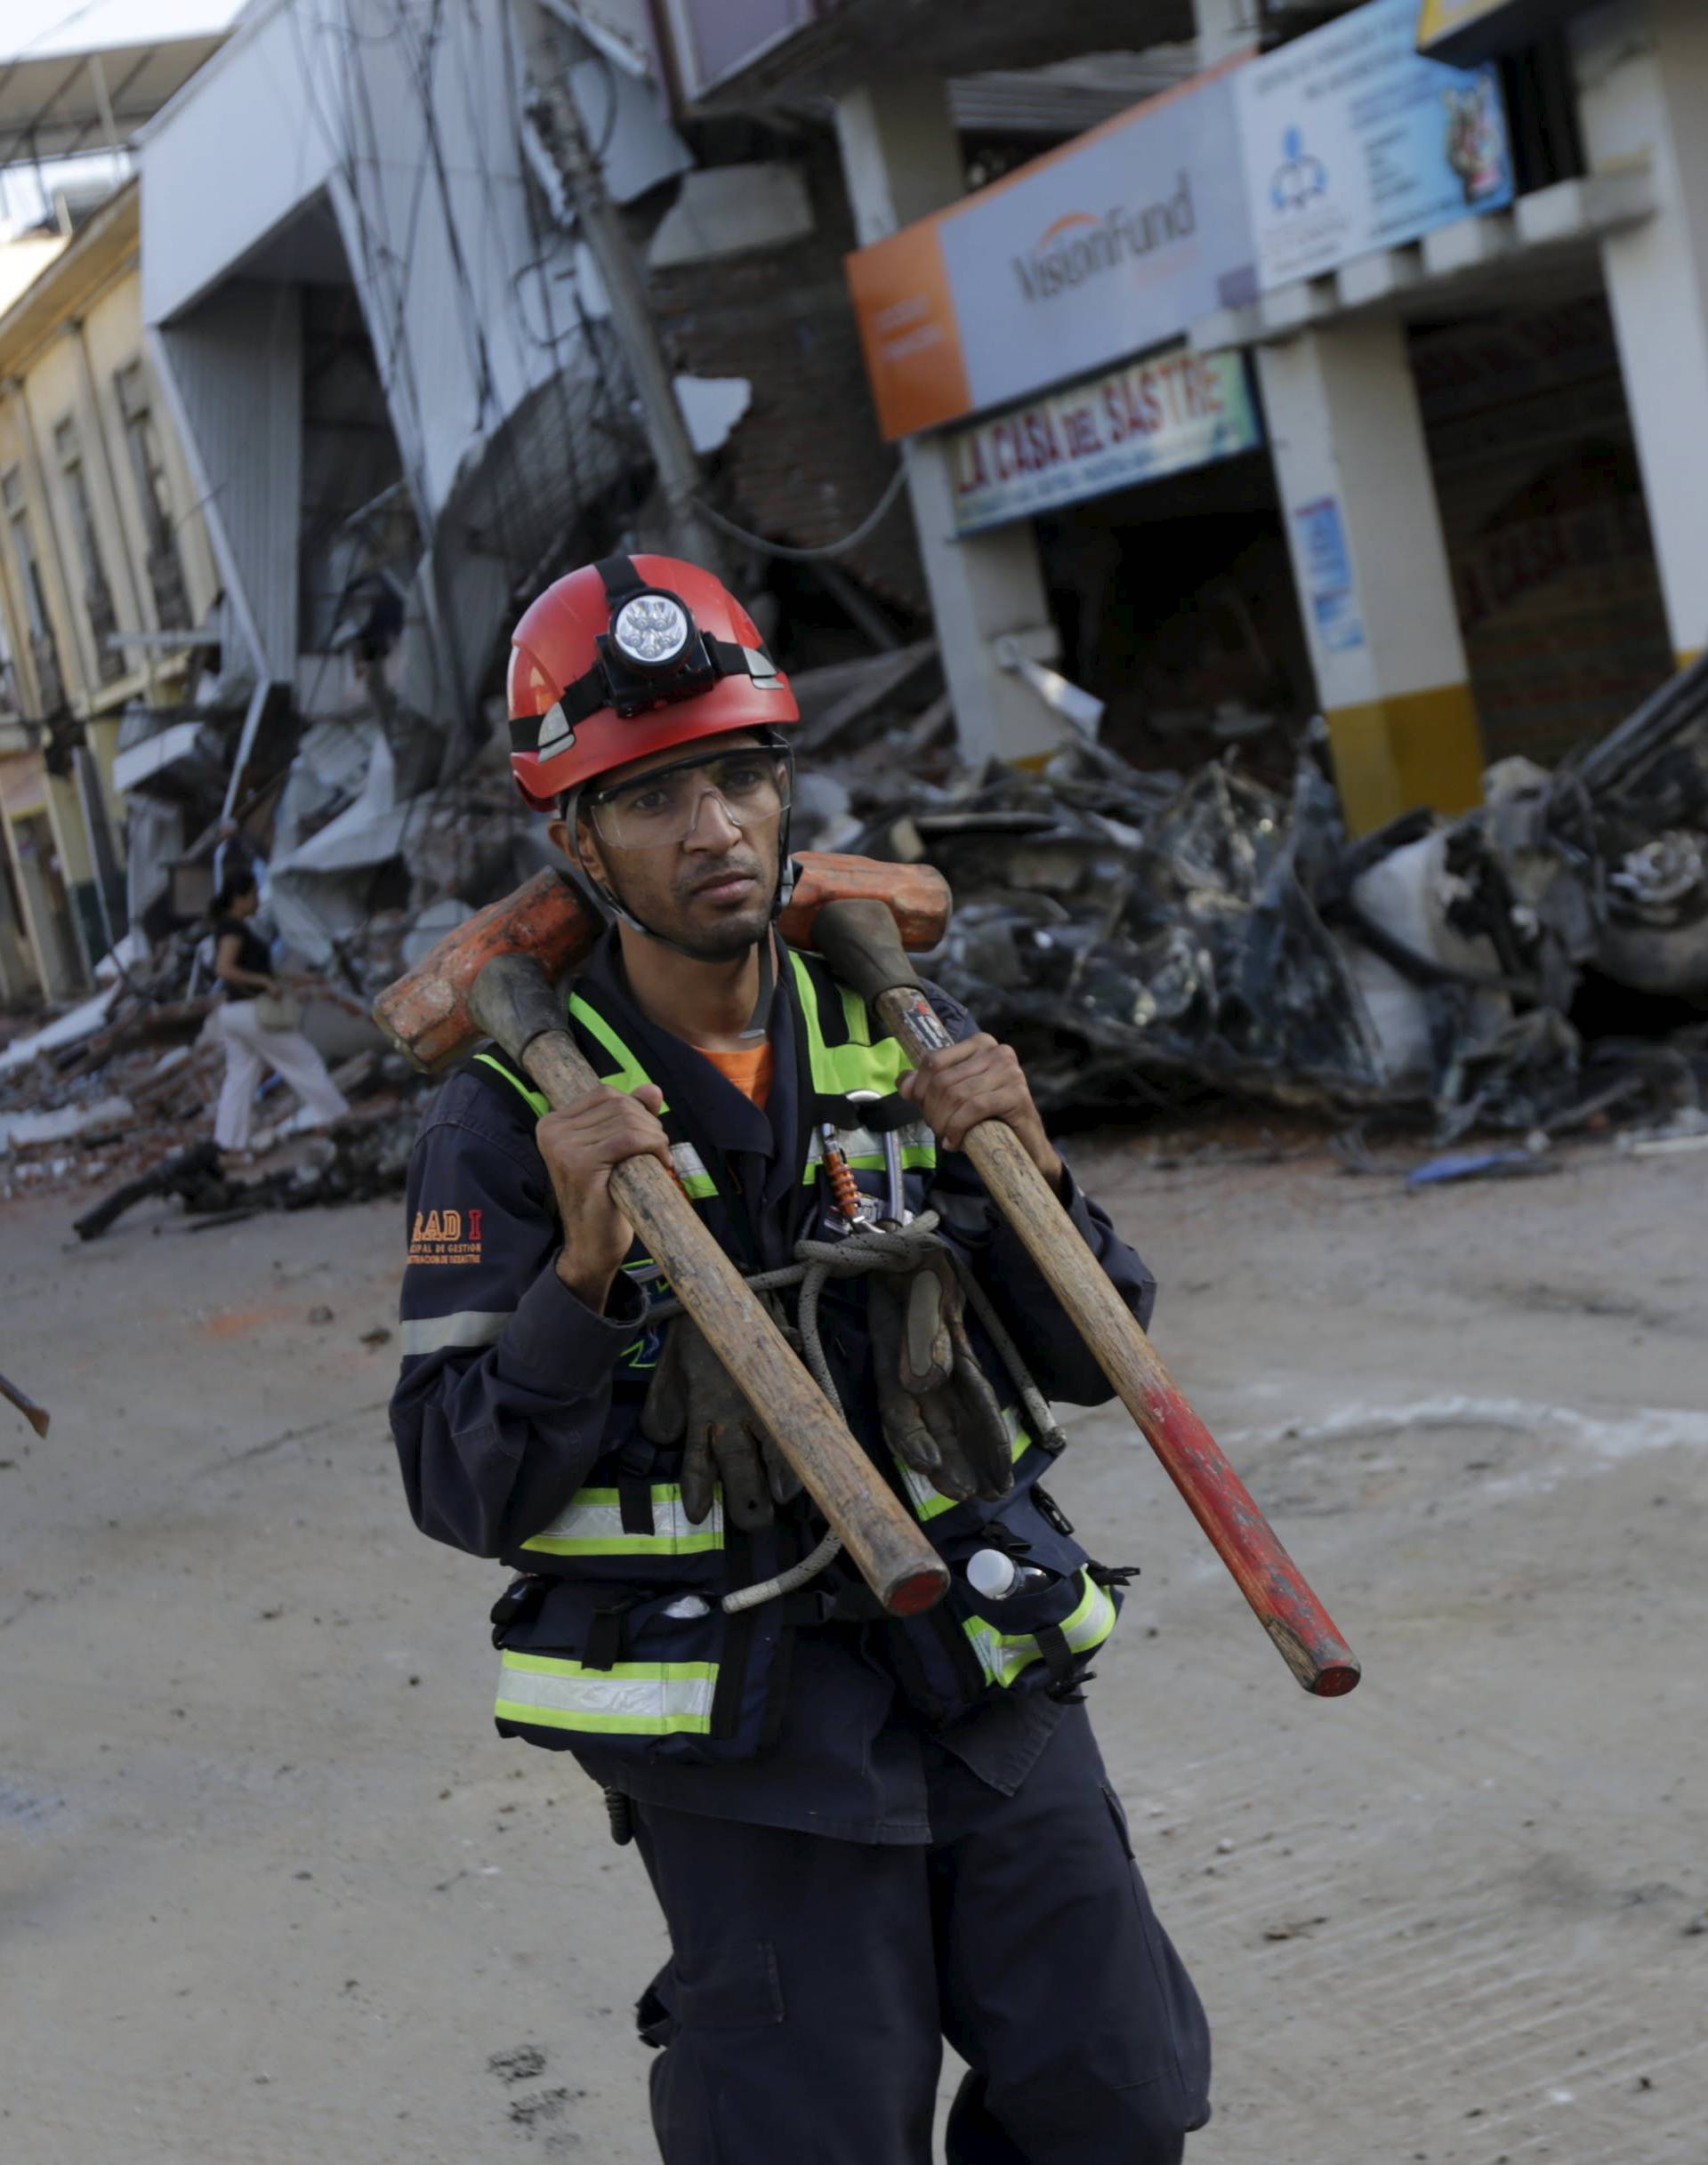 Rescue team members walk along a street past damaged building and debris after an earthquake struck off the Pacific coast, in Portoviejo